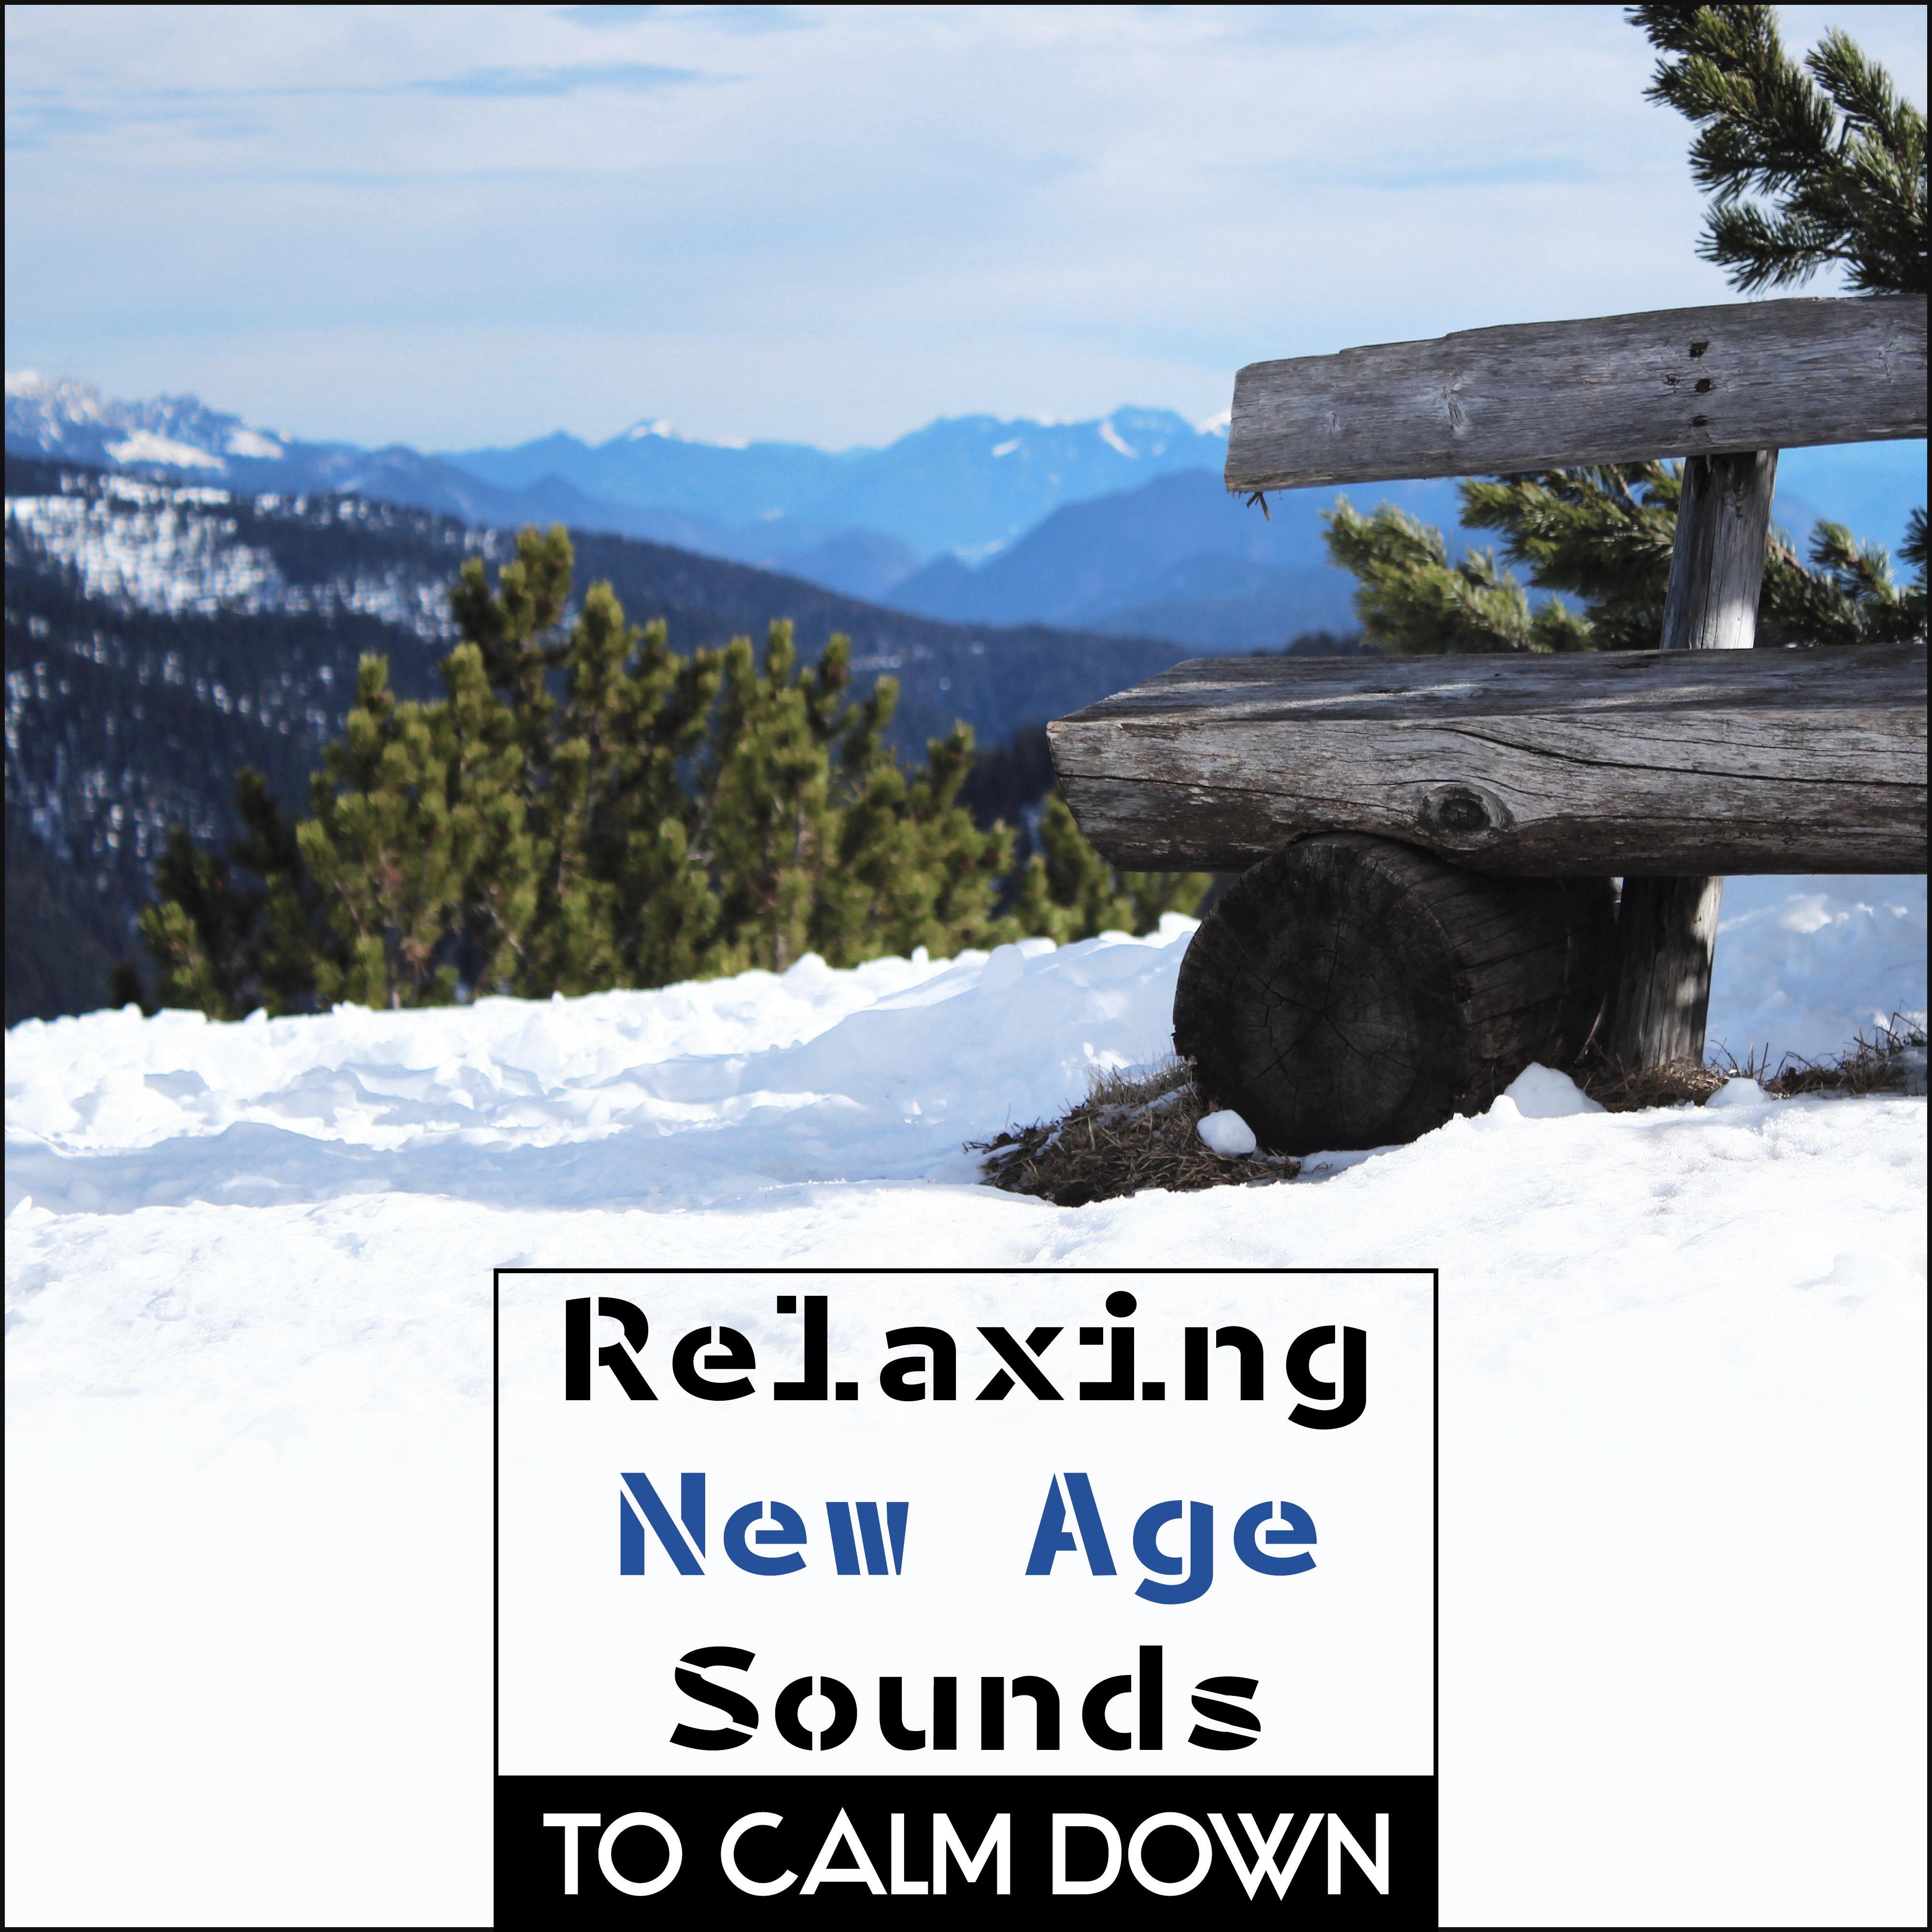 Relaxing New Age Sounds to Calm Down  New Age Relaxation, Inner Harmony, Stress Relief, Soft Music